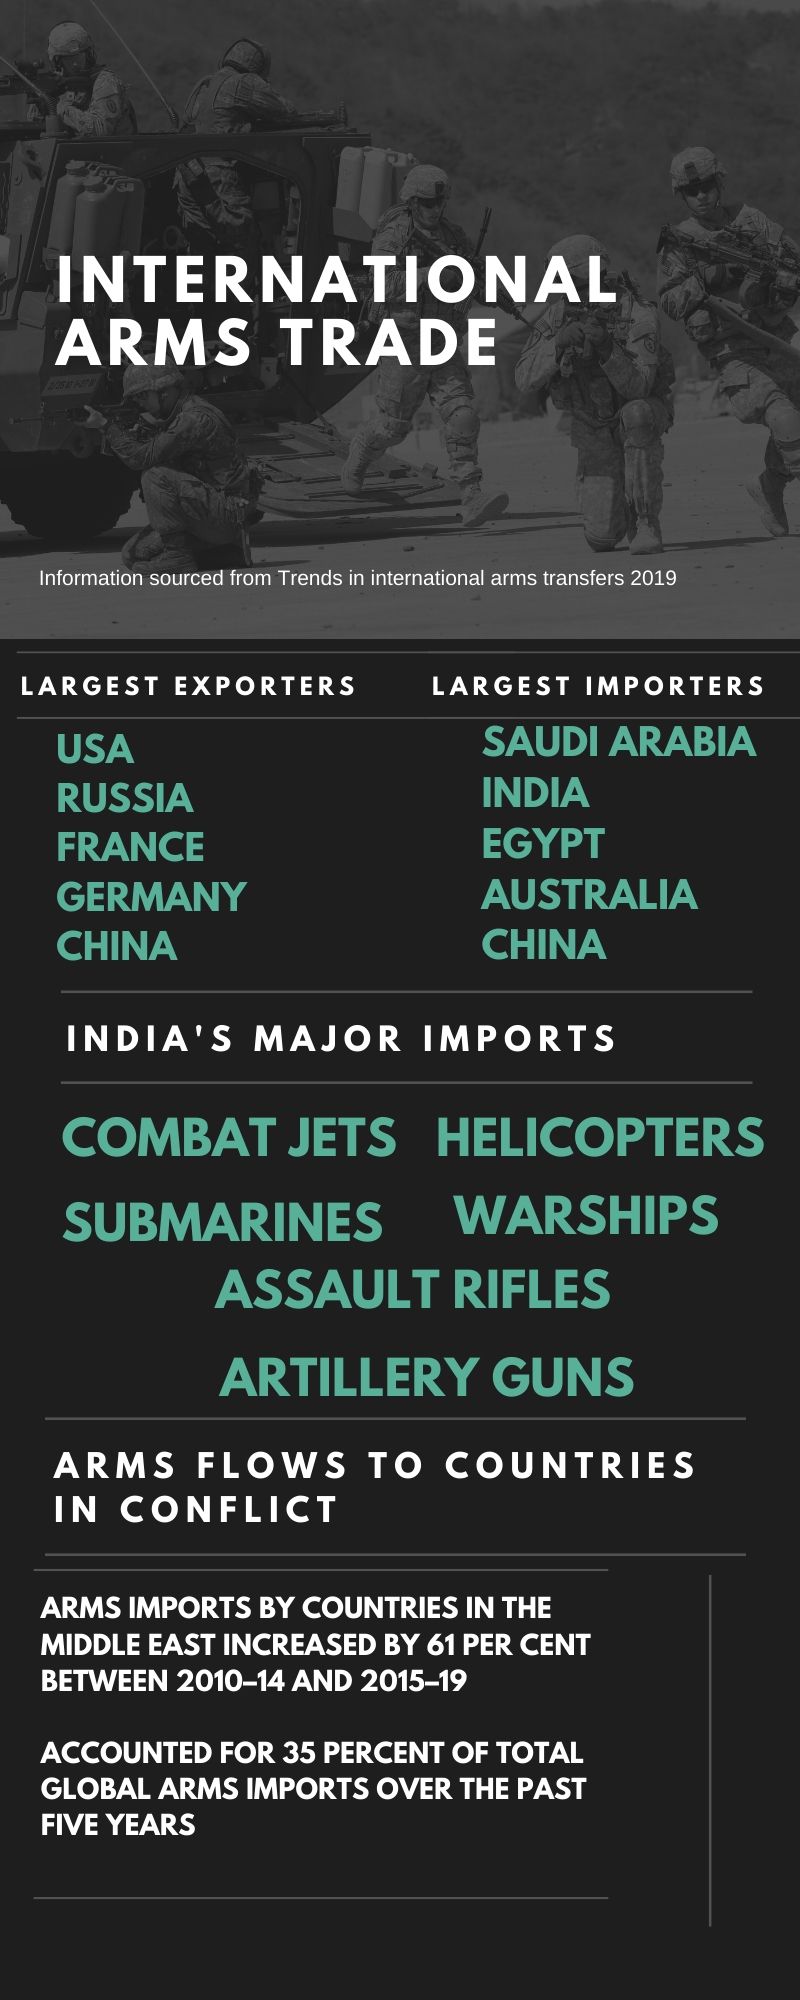 International arms trade: Facts and figures